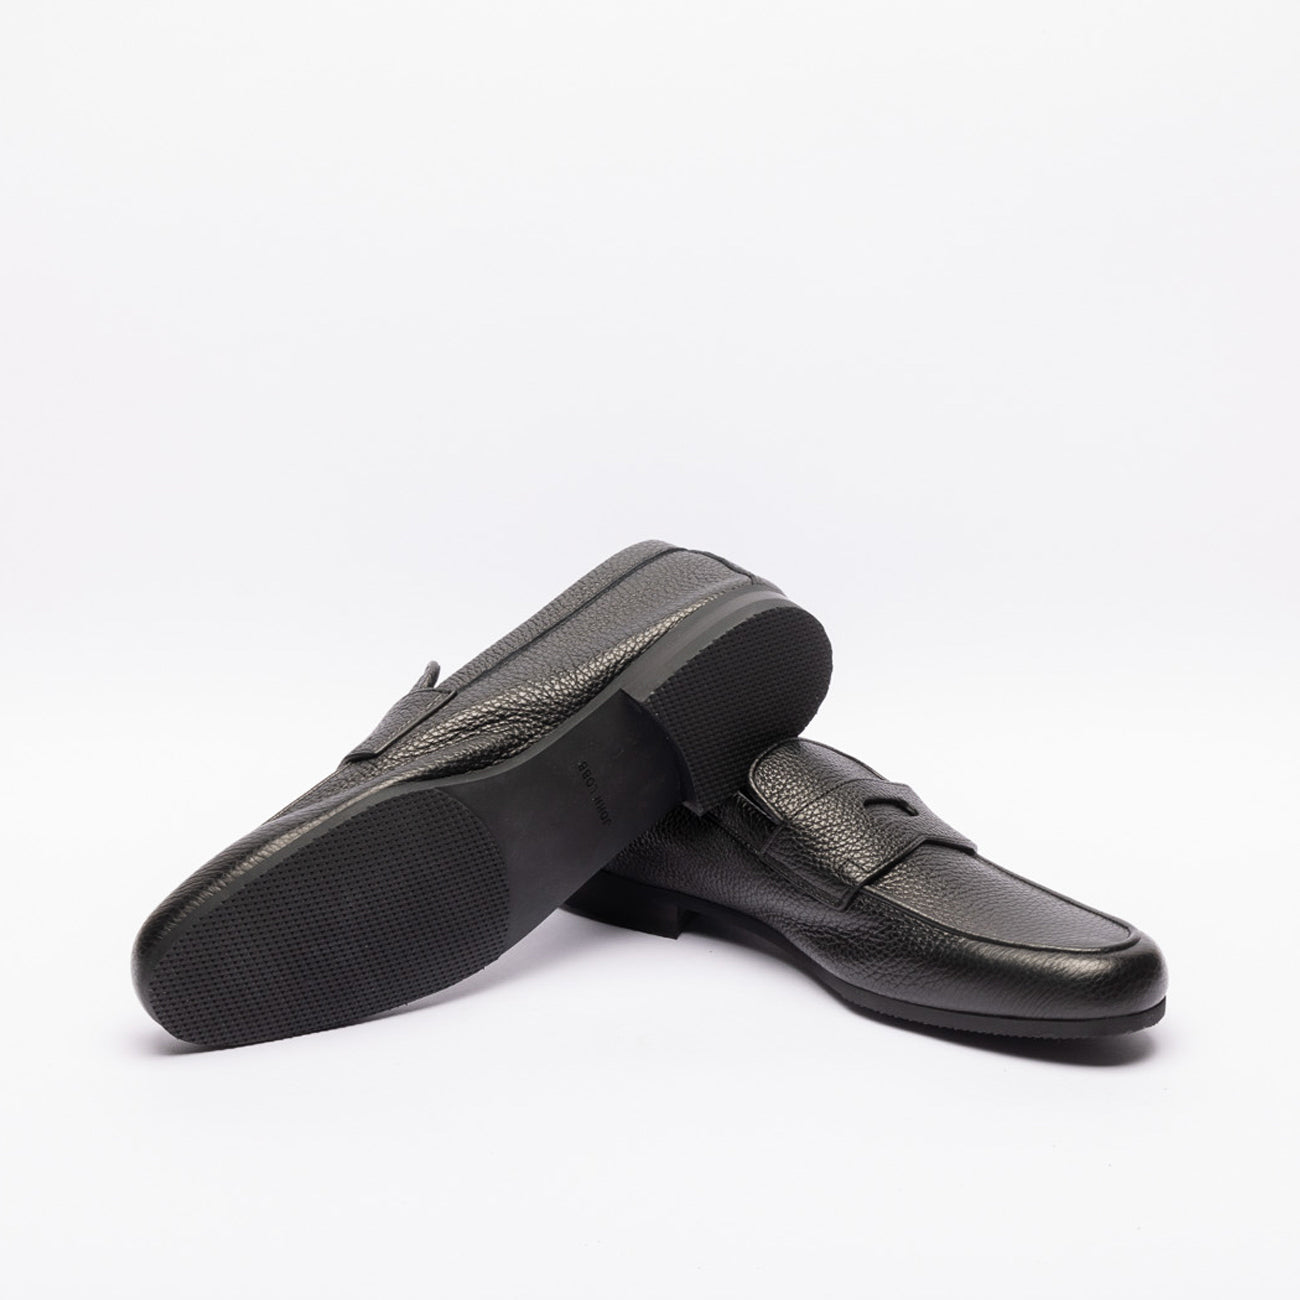 John Lobb Thorne unlined penny loafer in black hammered leather